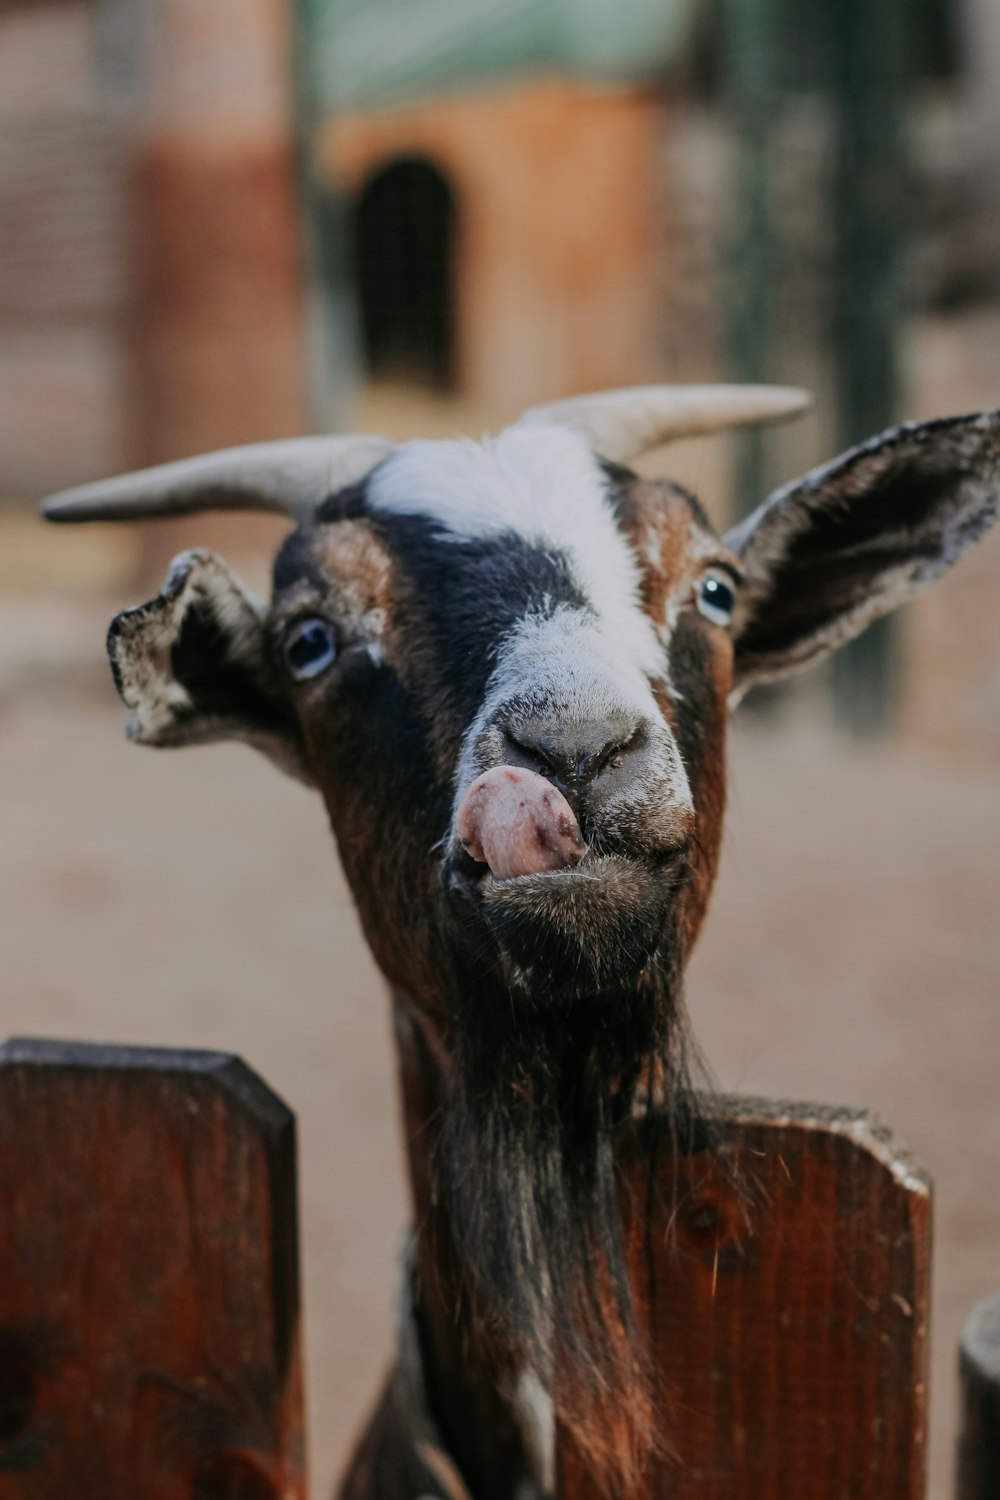 a goat sticking its head over a wooden fence